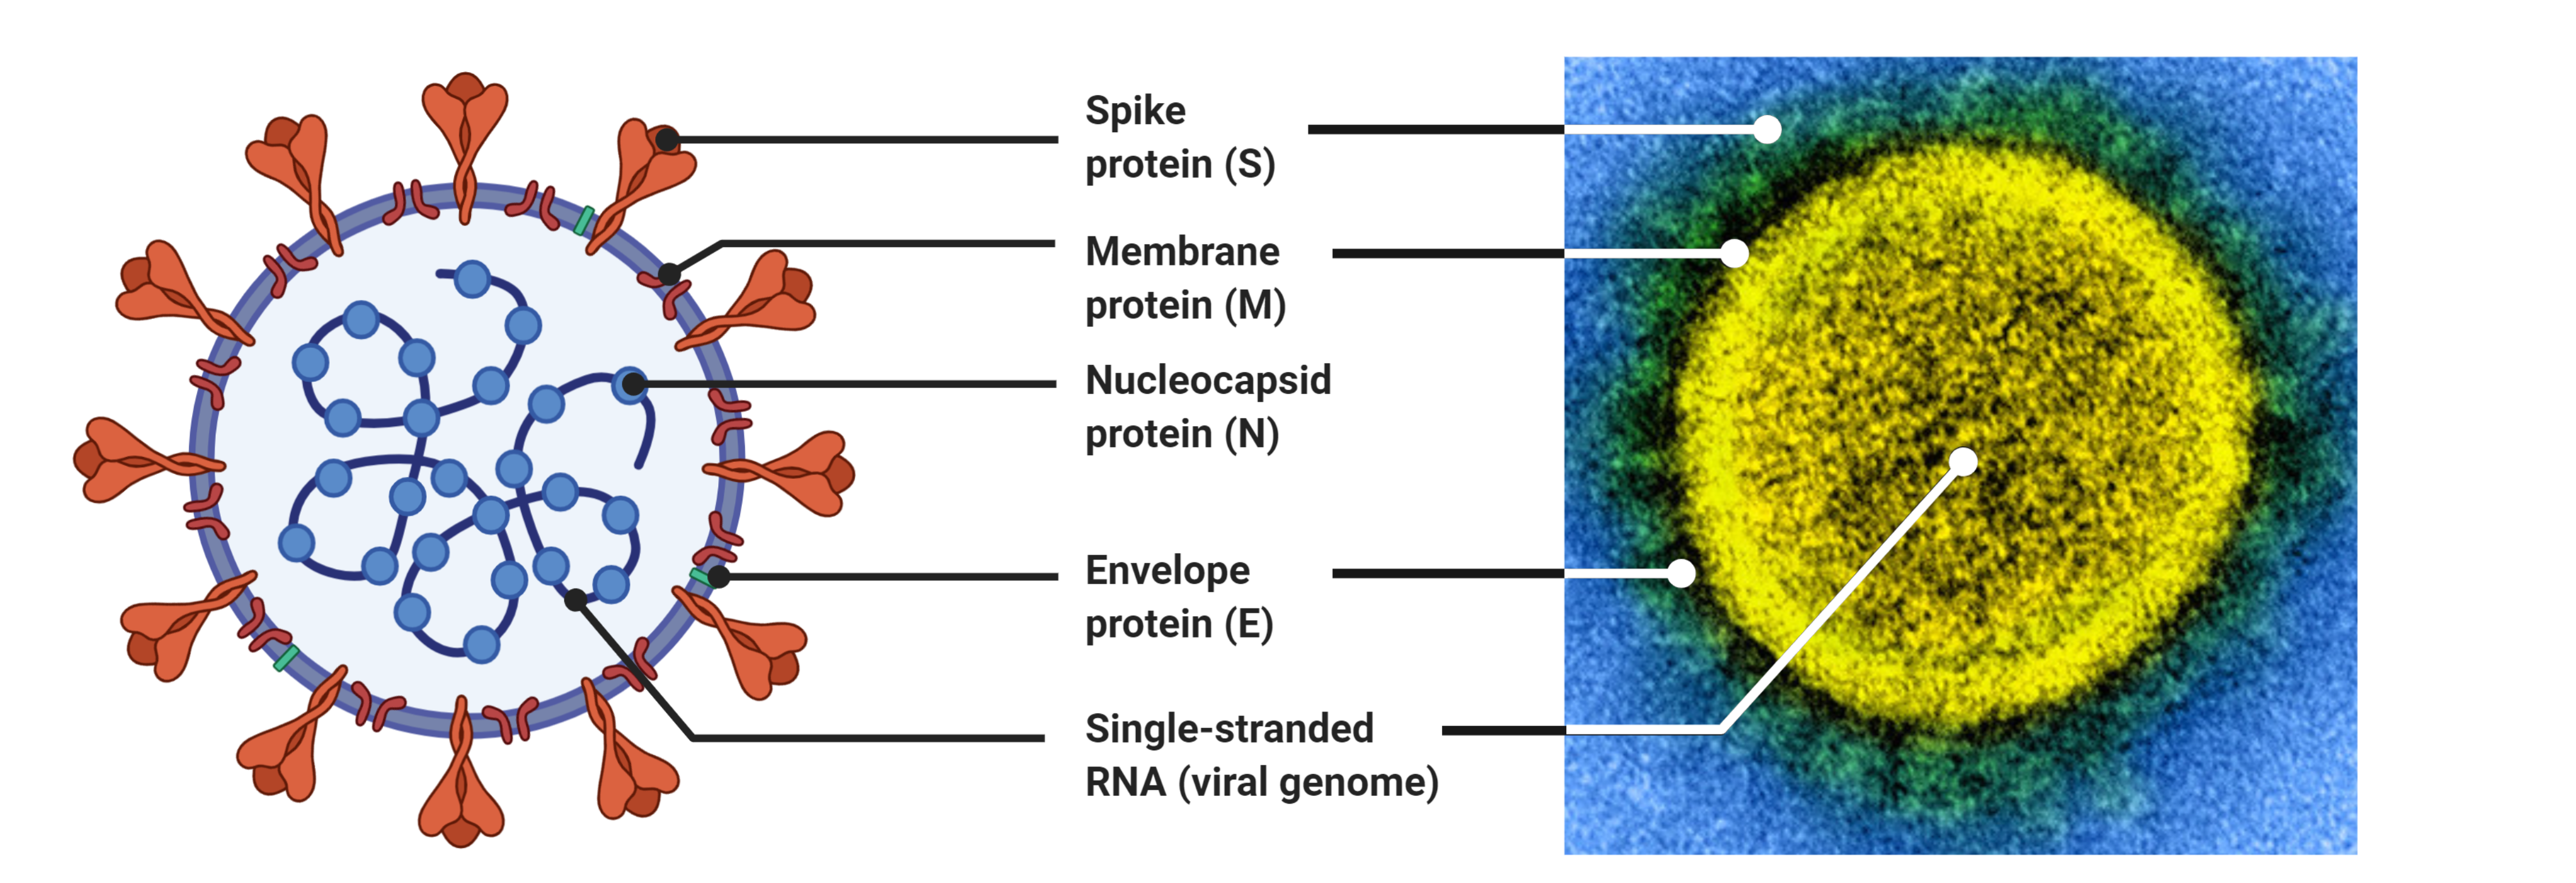 Figure 10: Structure of the SARS-CoV-2 virus. The development of vaccines depends on the immune system recognizing the virus. Here, the structure of SARS-CoV-2 is represented both in the abstract and against a visualization of the virion. The abstracted visualization was made using BioRender (1471) using the template “Human Coronavirus Structure” by BioRender (August 2020) (1472). The microscopy was conducted by the National Institute of Allergy and Infectious Diseases (1473).